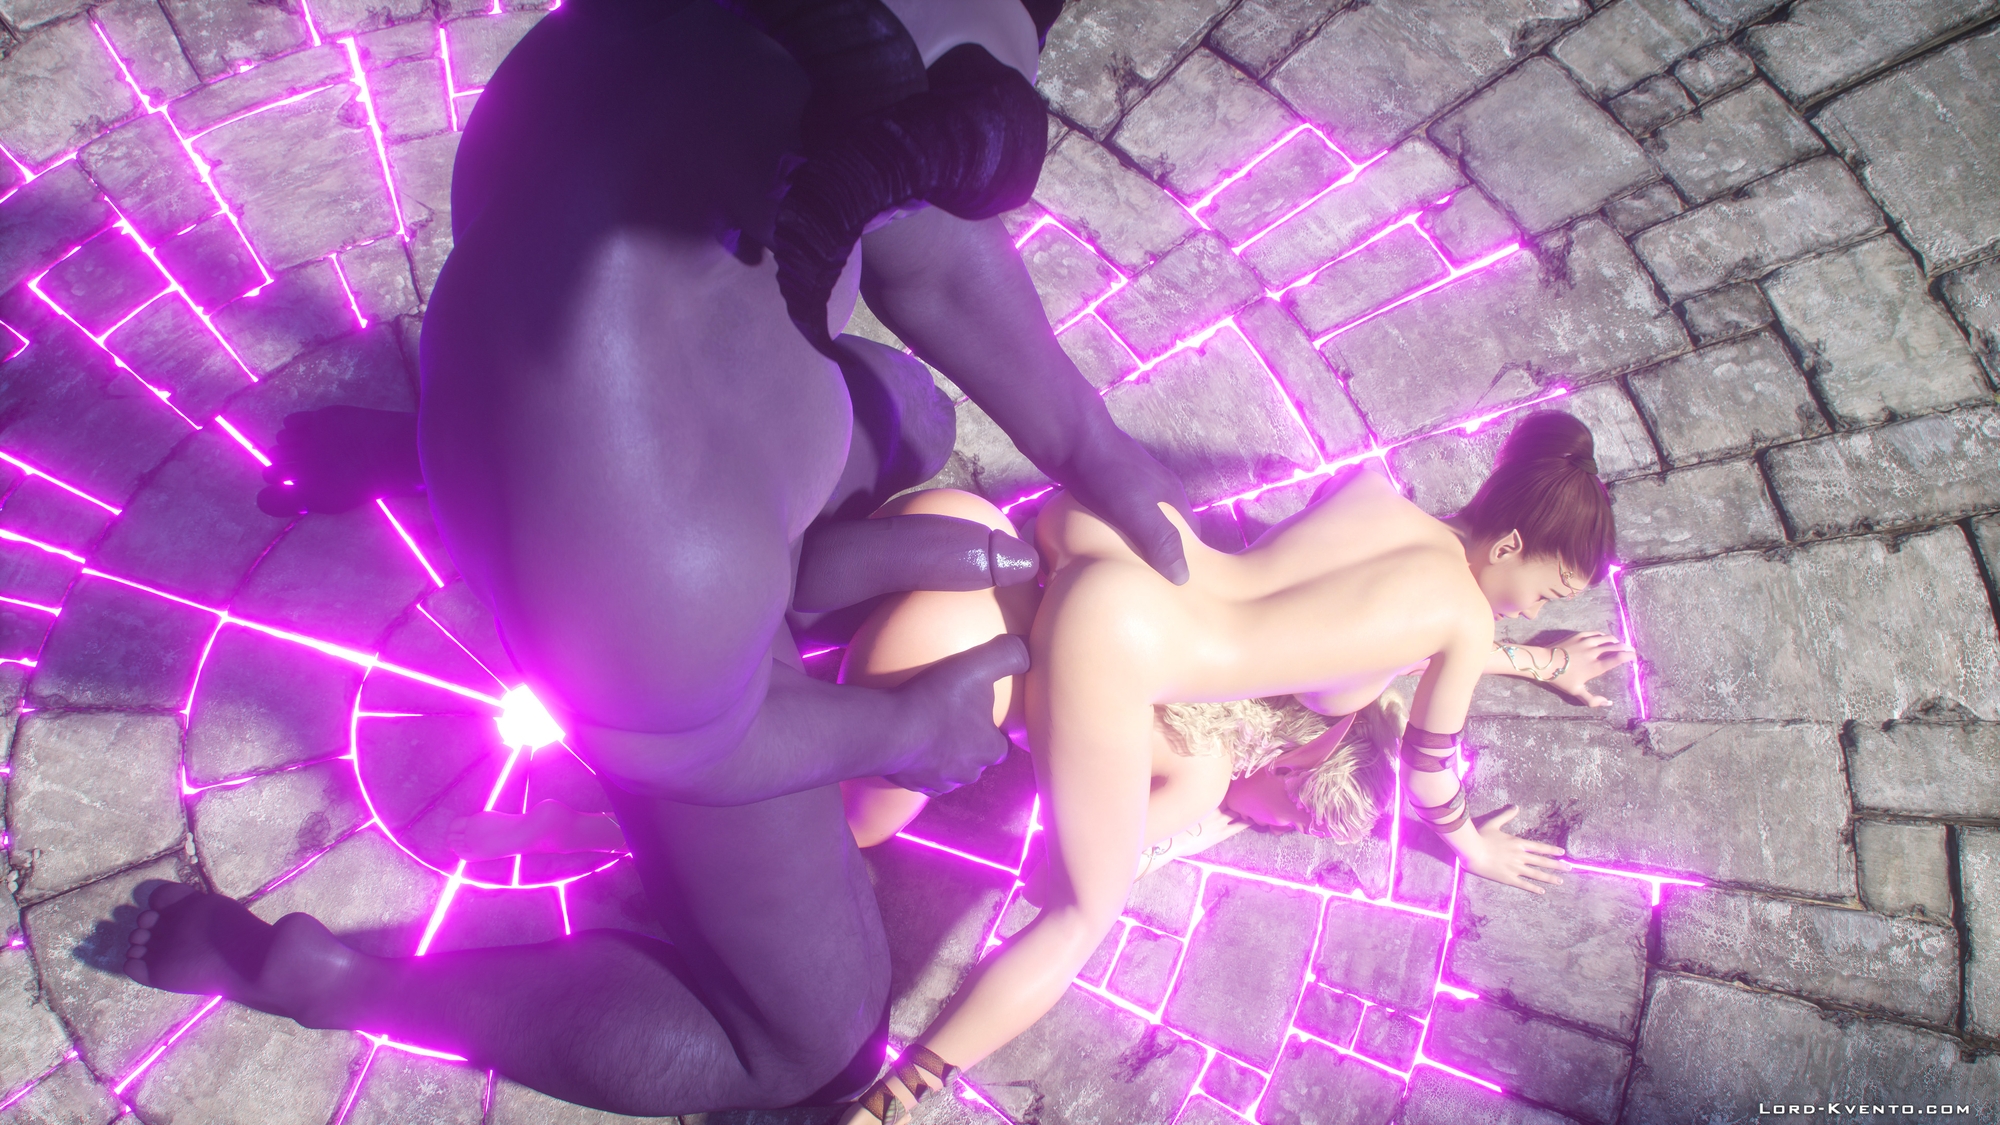 World Of Orgasm - Golem's Awakening  3d Porn Magic Elf Double Penis Horns Threesome Forced Doggy Style Pussy Outdoor Sex Double Penetration Big boobs Cum In Face Cumshot 6